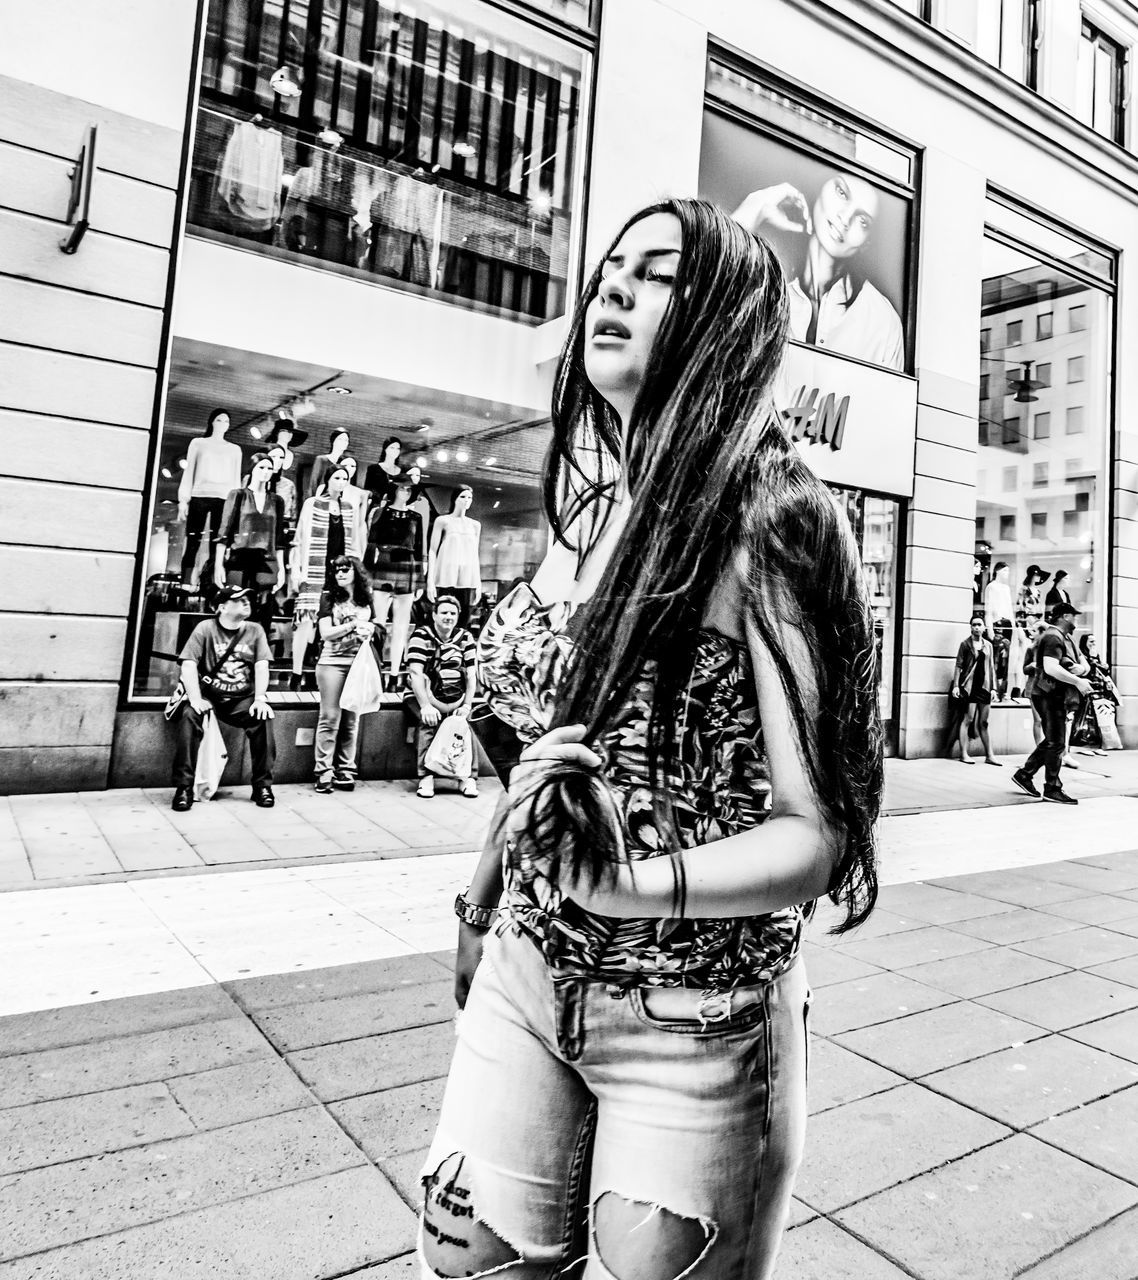 city, architecture, street, lifestyles, one person, building exterior, real people, built structure, incidental people, long hair, young adult, casual clothing, leisure activity, standing, city life, women, hairstyle, day, front view, hair, beautiful woman, outdoors, teenager